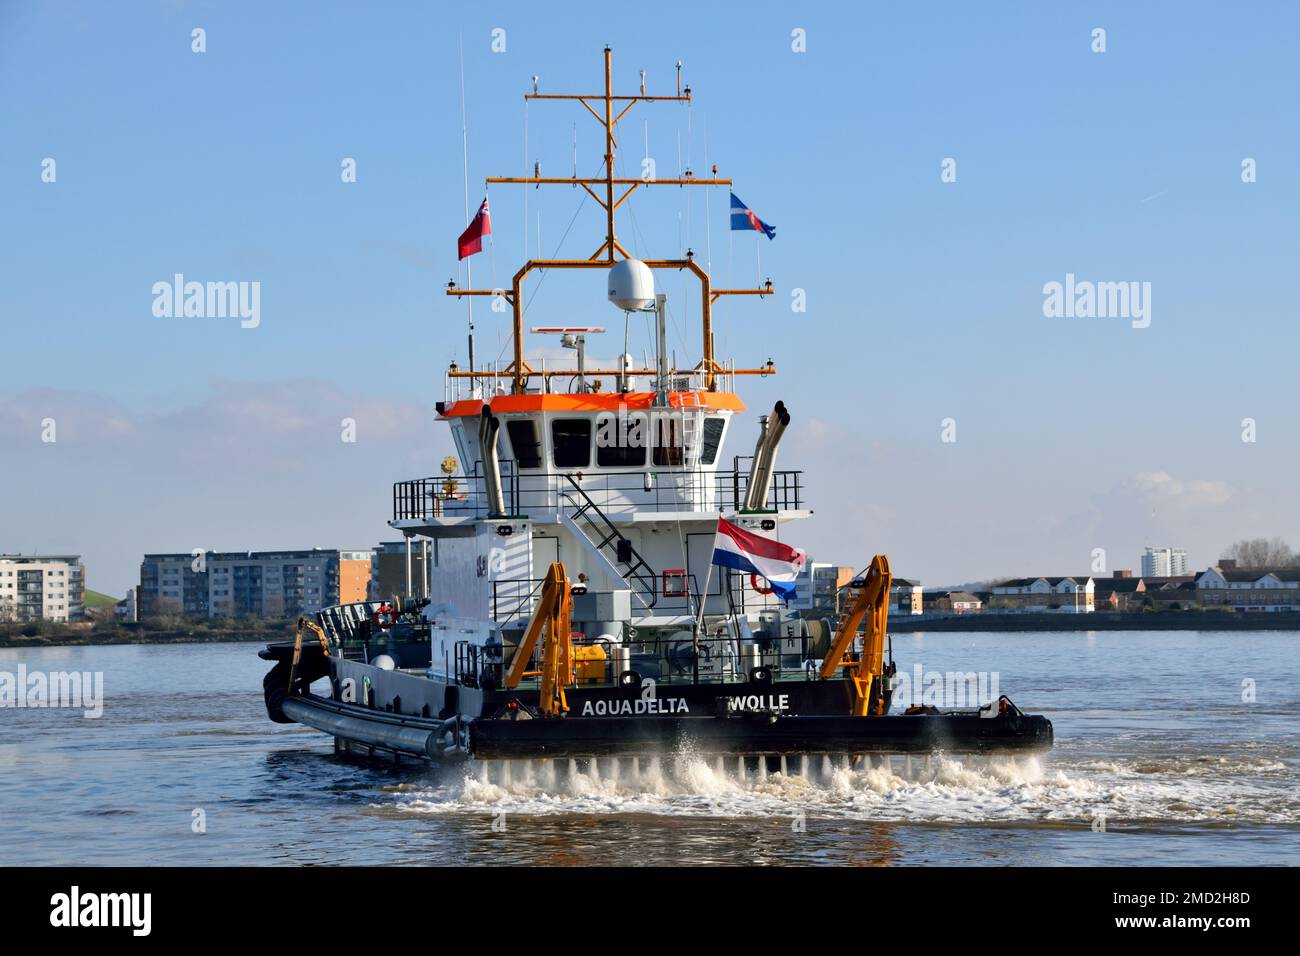 AQUADELTA is a water injection dredger, built in 2022 by Scheepswerf Bijlsma for Van der Kamp and is seen working on the Thames in London Stock Photo